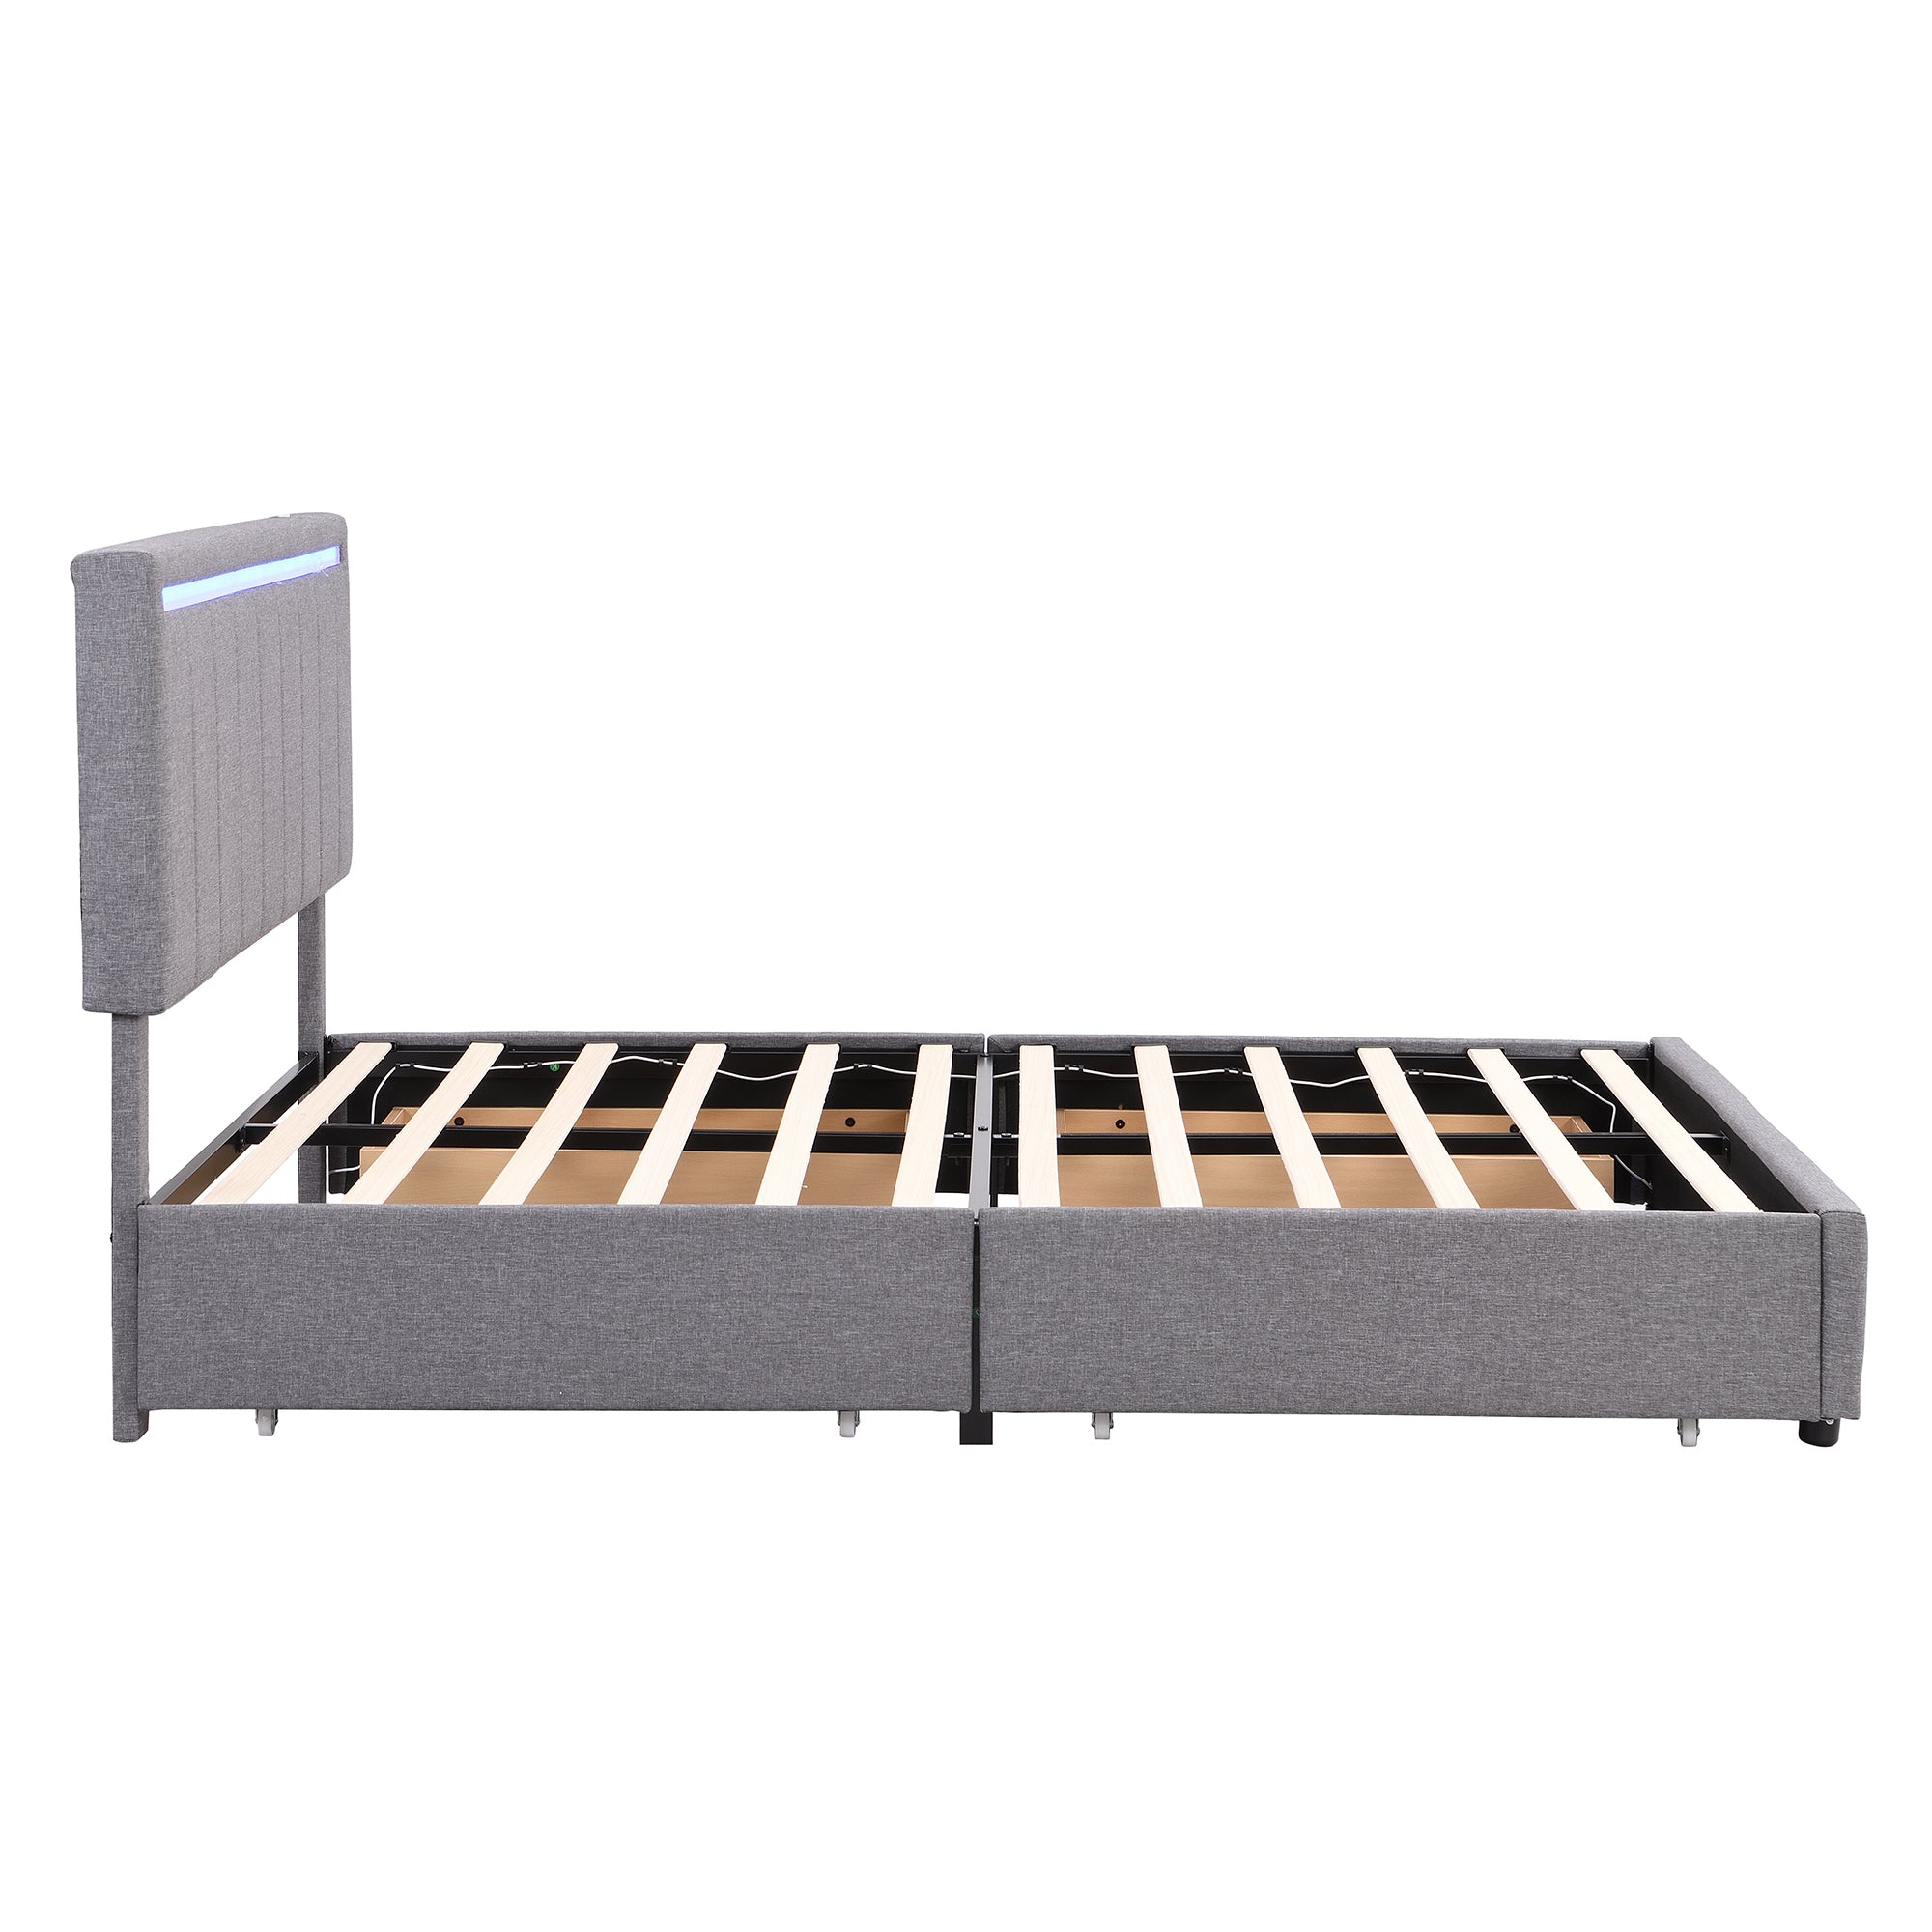 Charles Queen Gray Linen Platform Bed with LED Light and 4 Storage Drawers, USB ports and Power Outlet